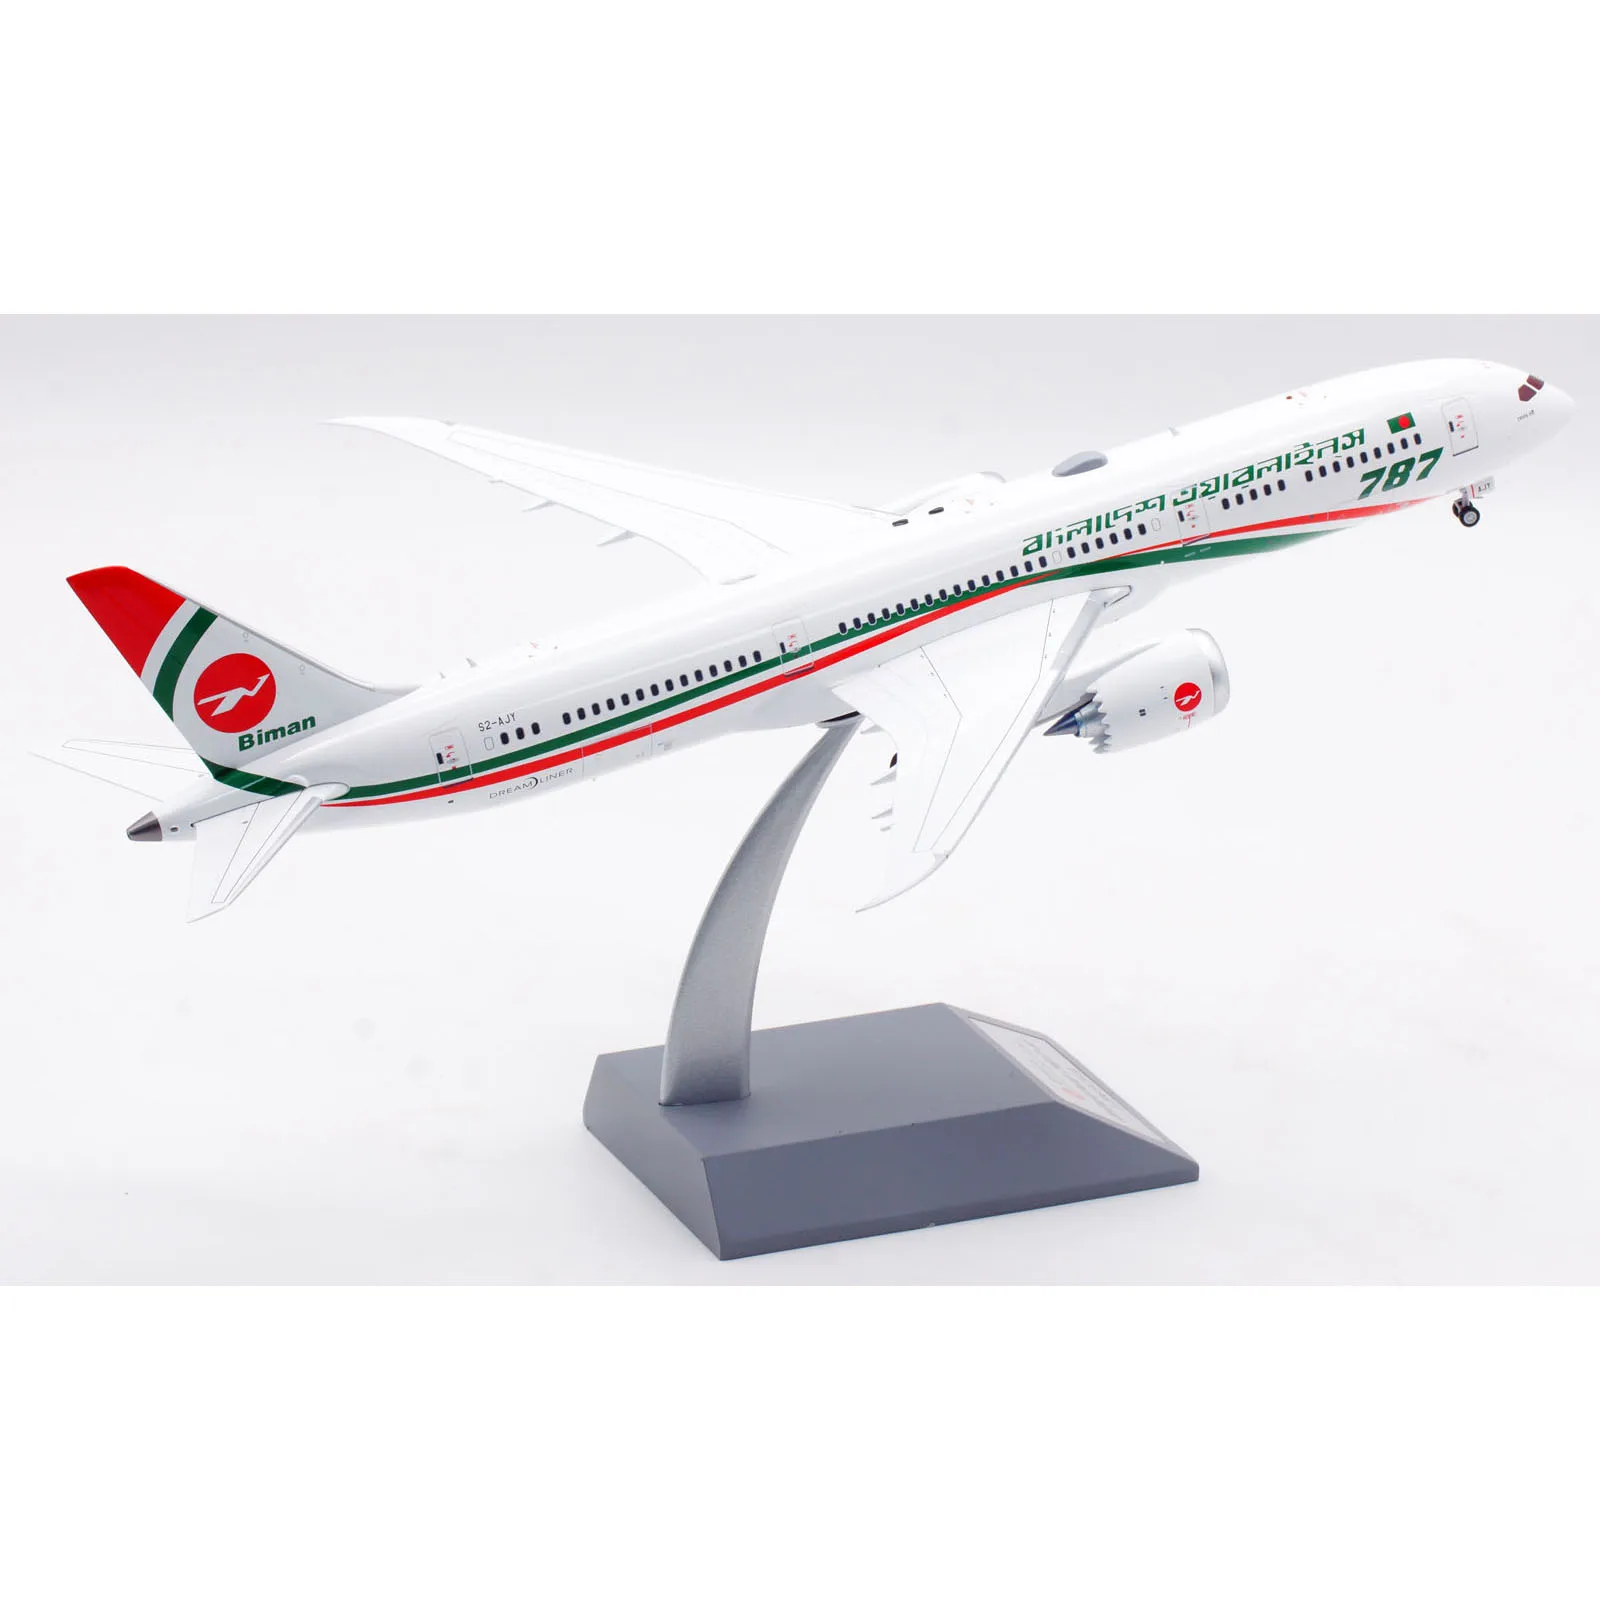 IF789EY1123 Alloy Collectible Plane Gift INFLIGHT 1:200 Biman Bangladesh Airlines Boeing B787-9 Diecast Aircraft Model S2-AJY